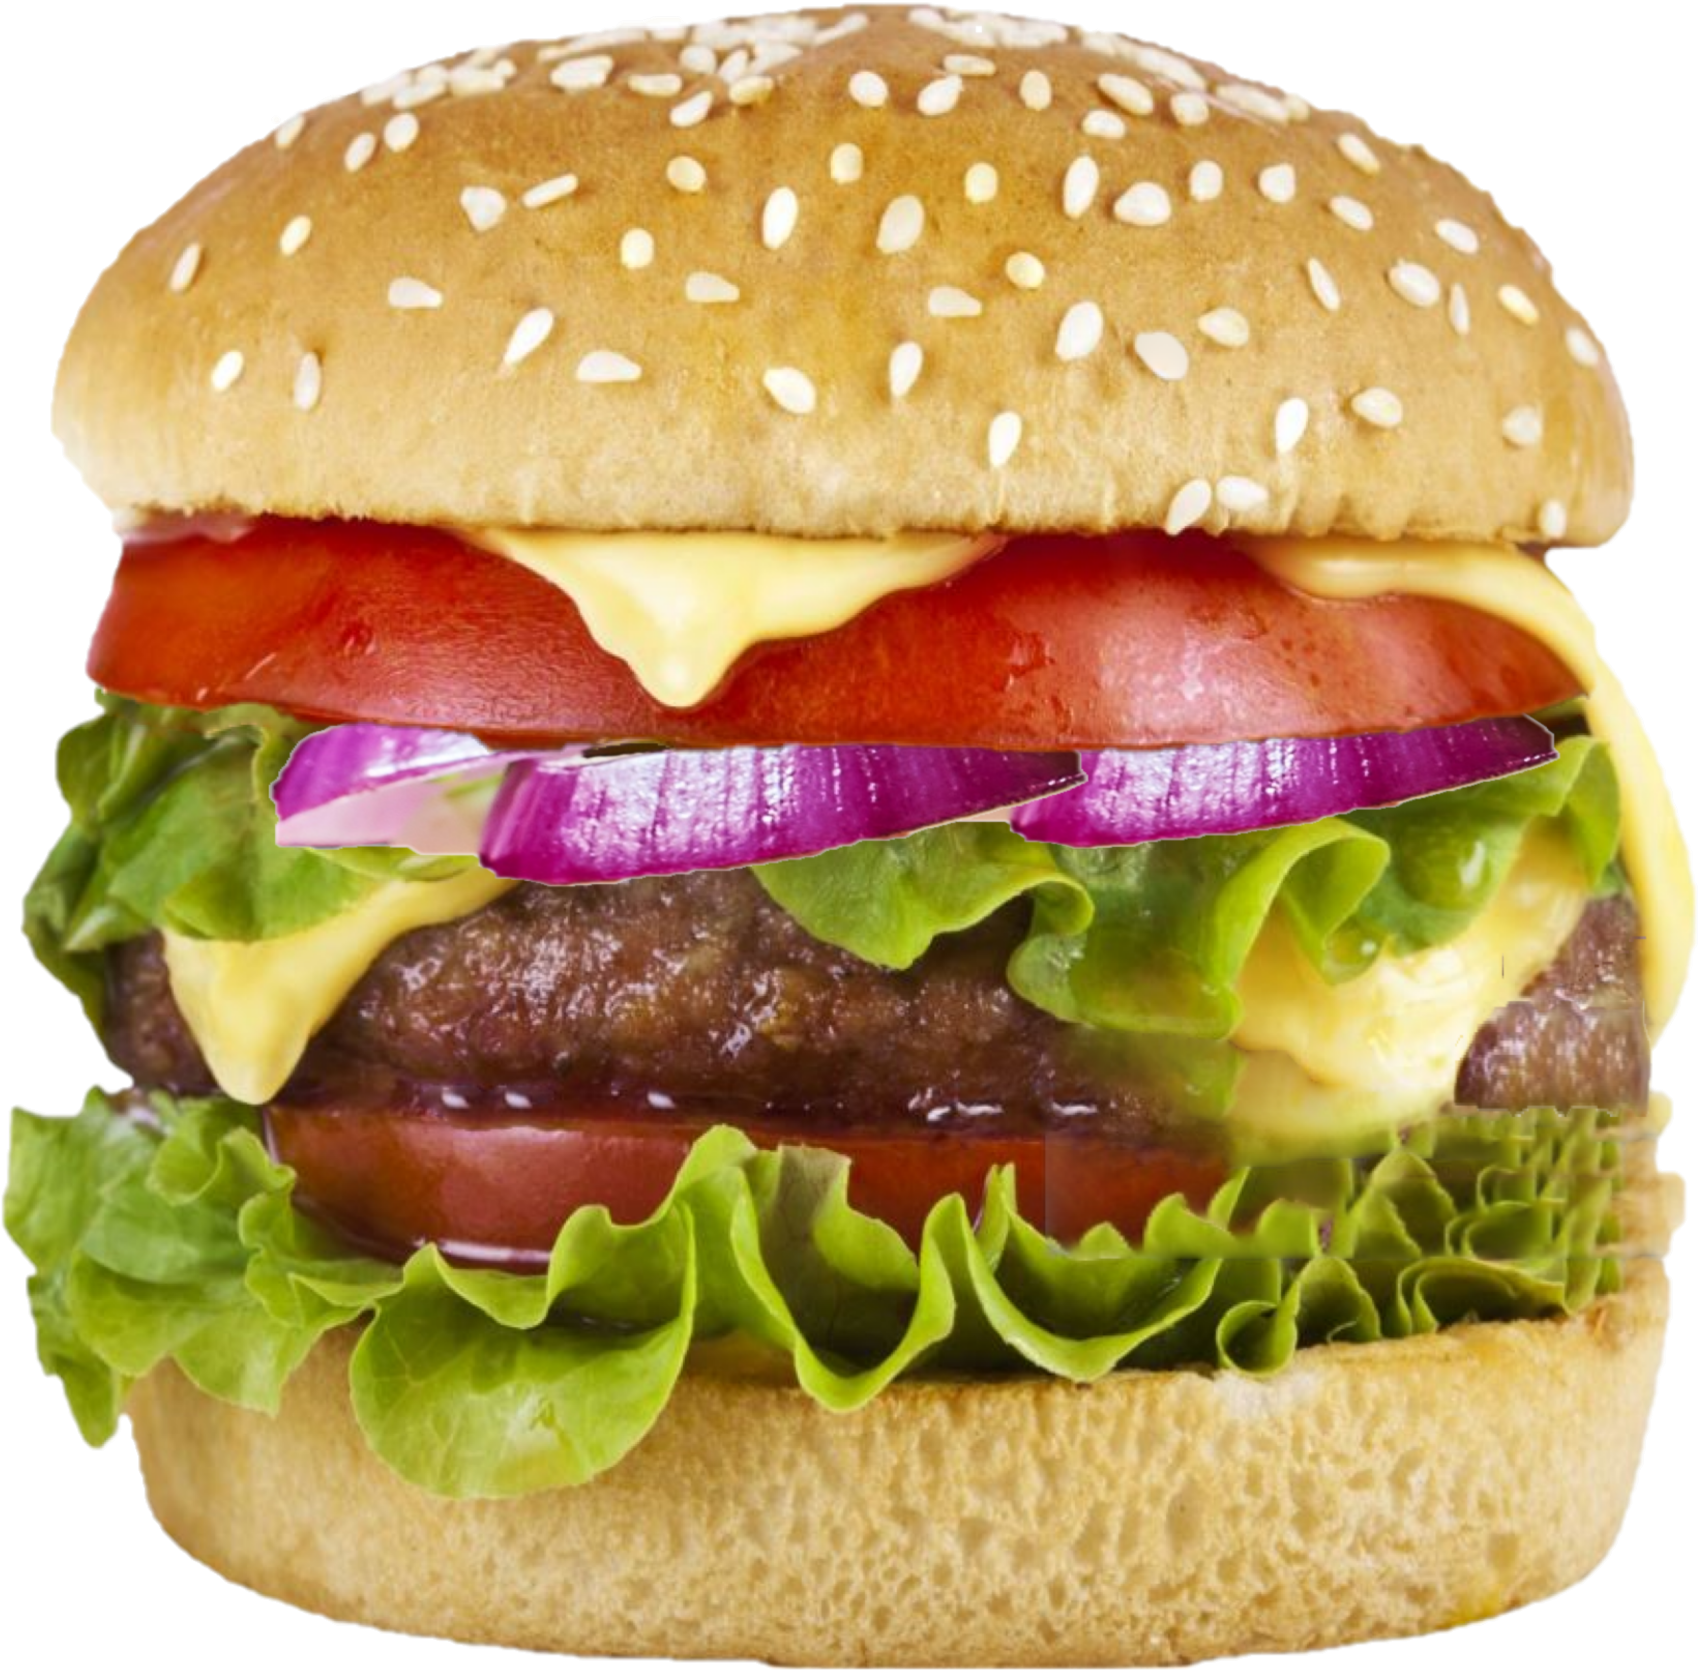 Classic Cheeseburger Delicious Fast Food.png PNG